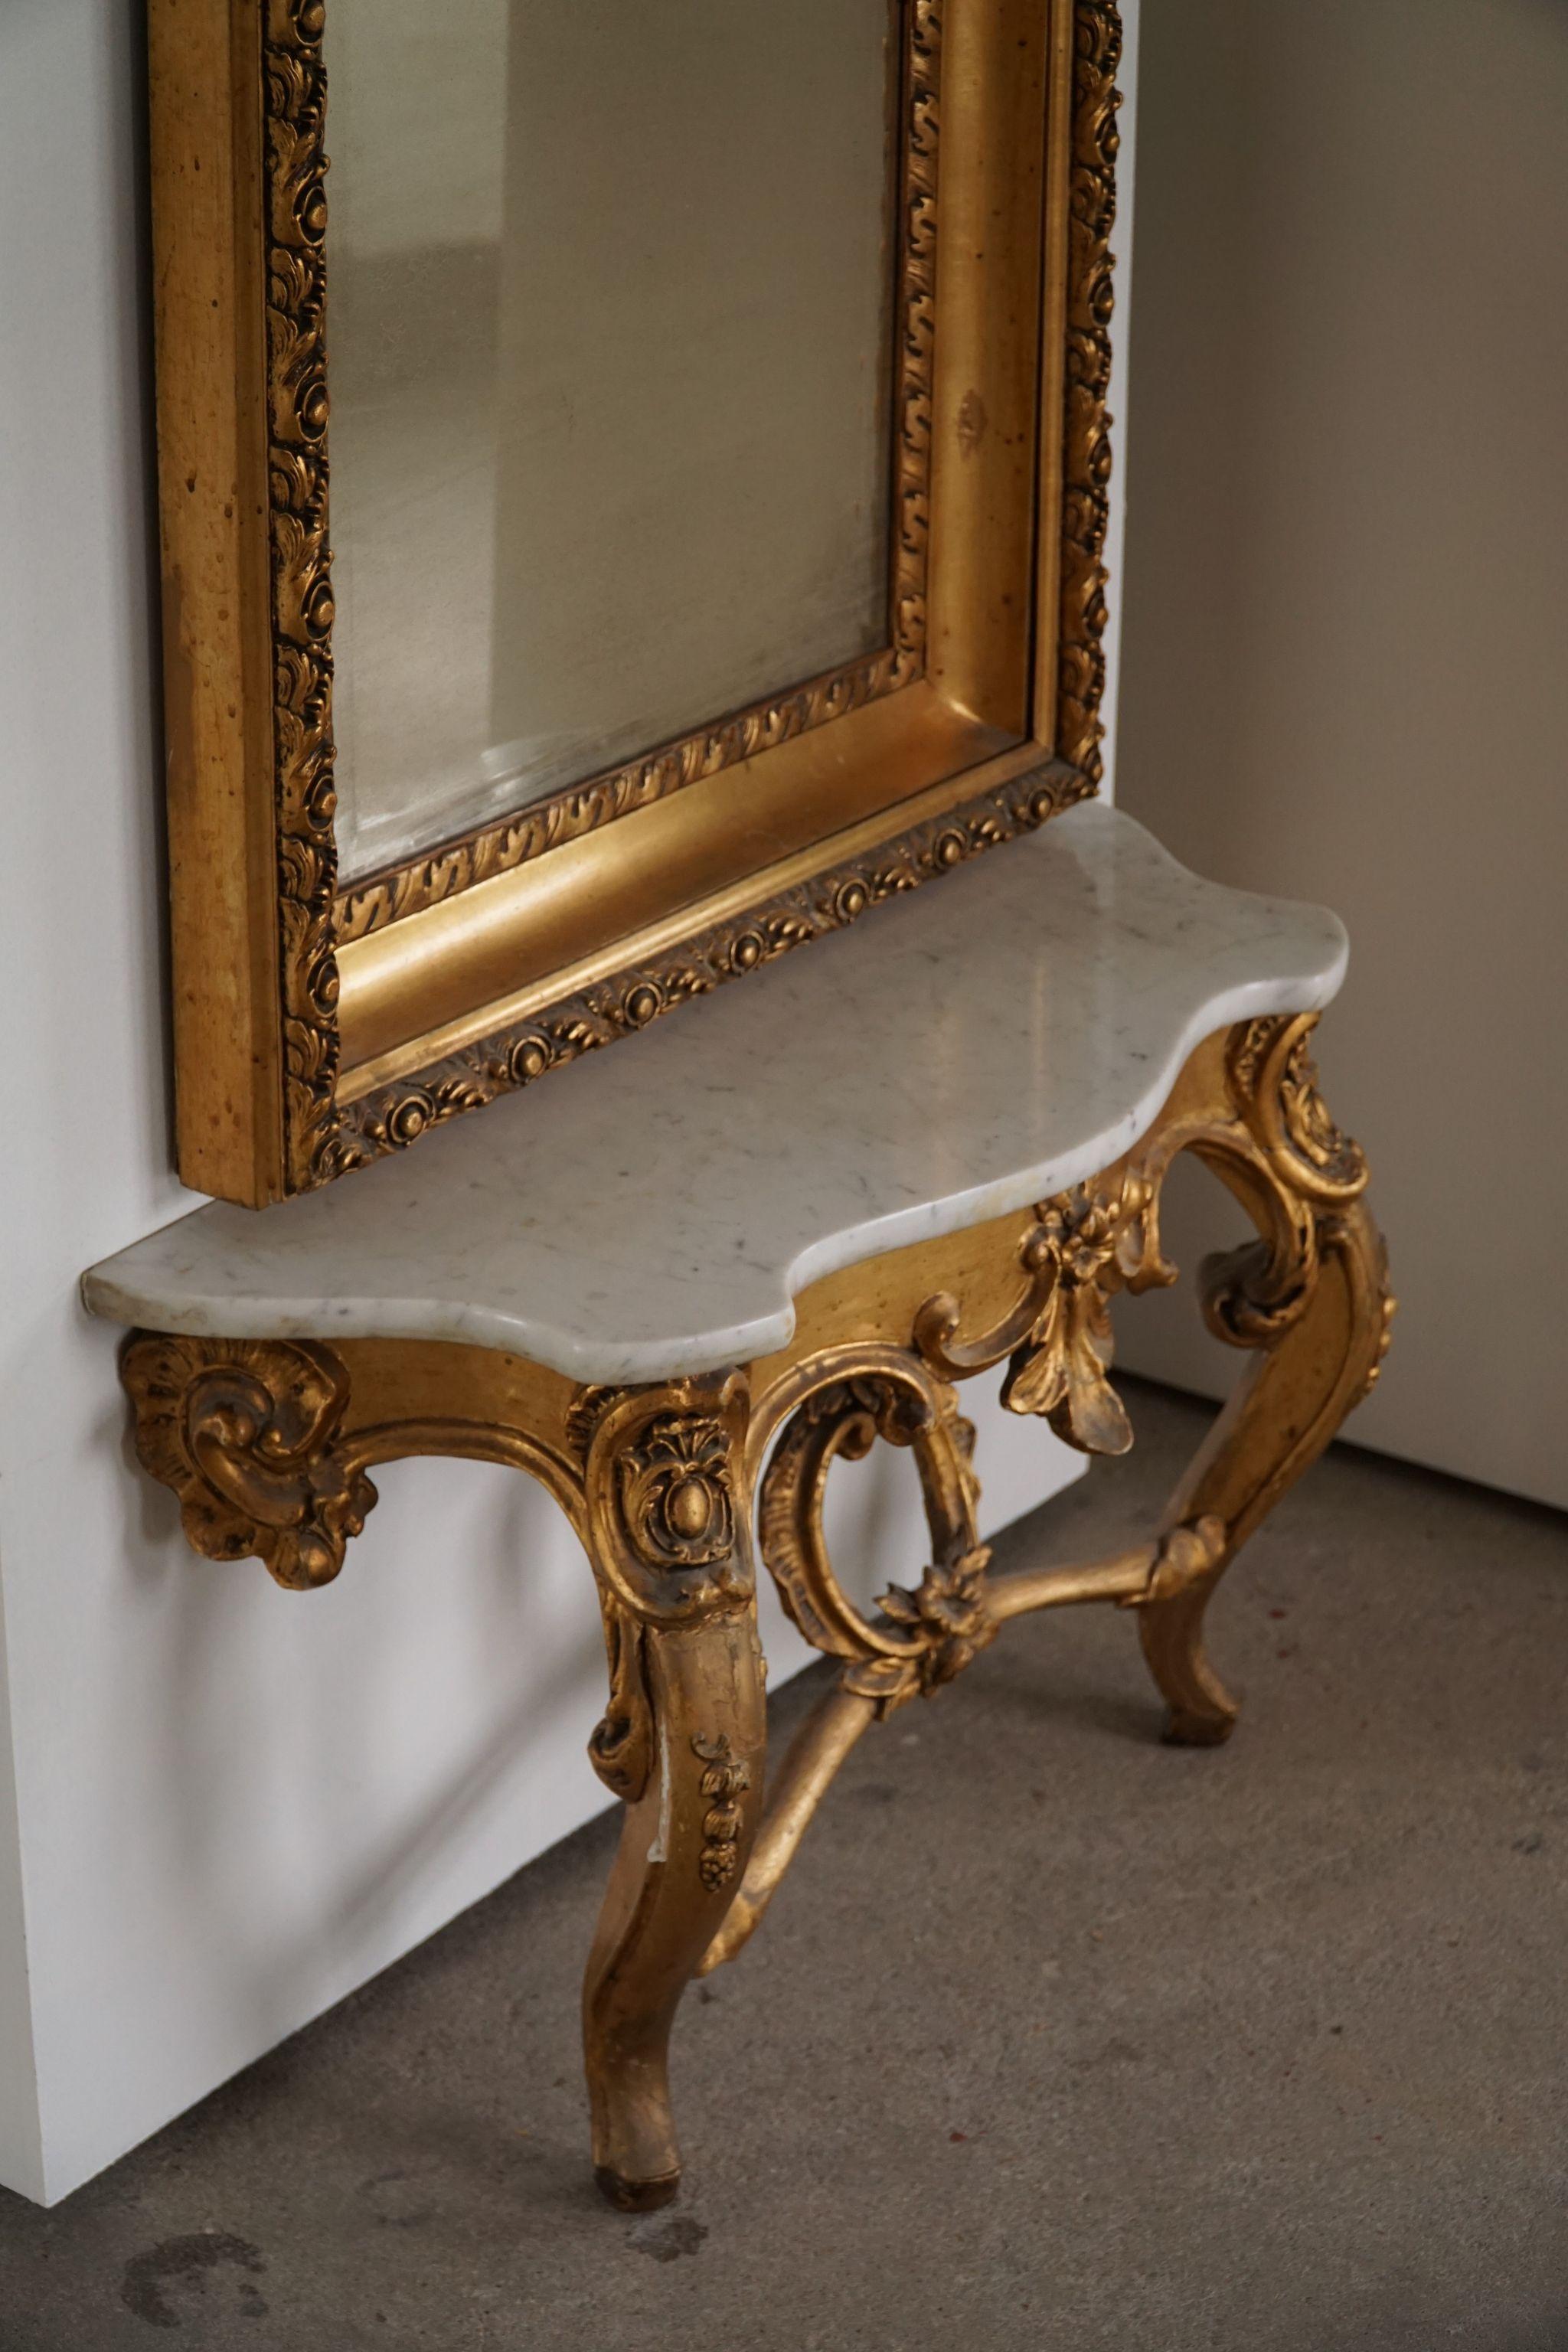 Antique Danish Mid-19th Century Rococo Gold Plated Mirror For Sale 6